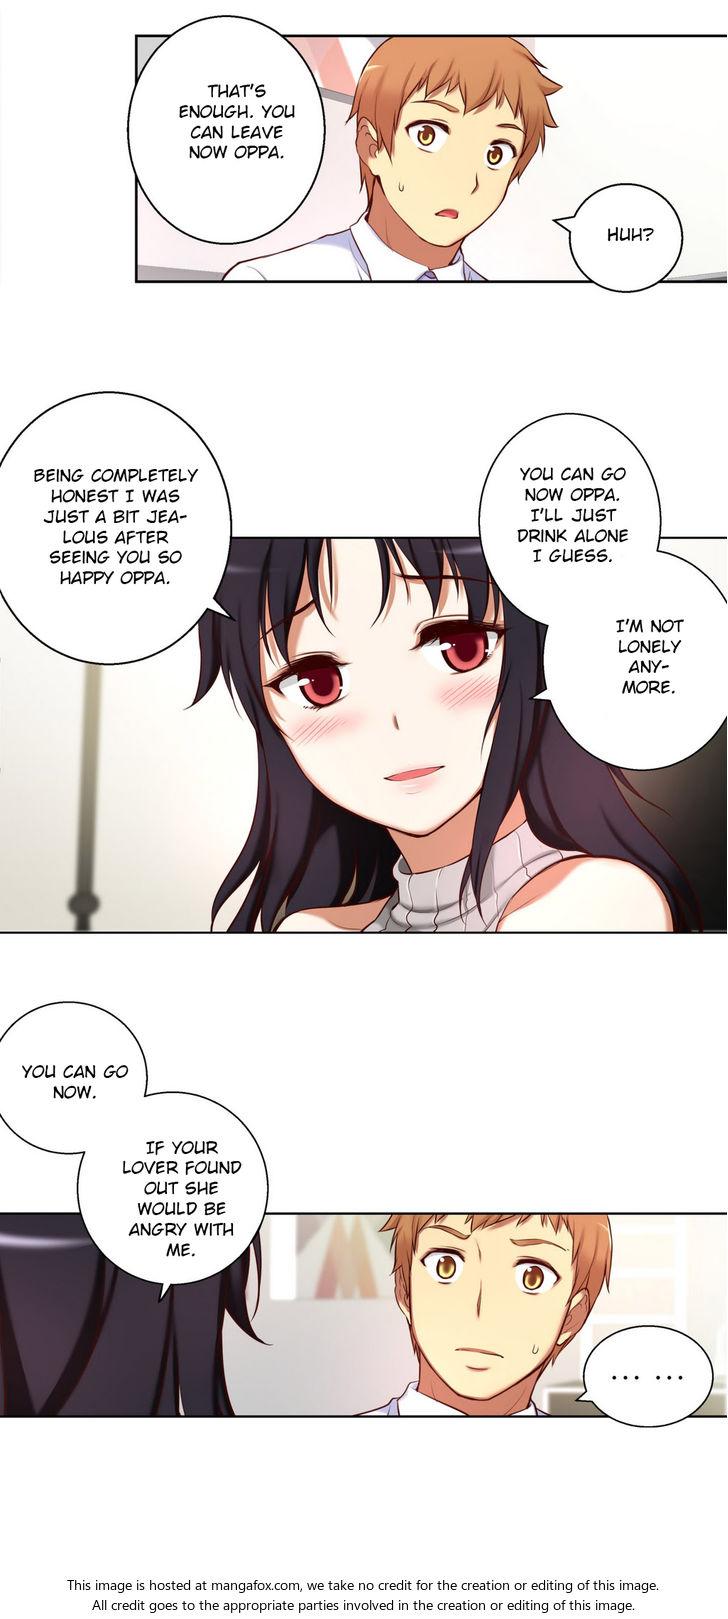 [Donggul Gom] She is Young (English) Part 1/2 487